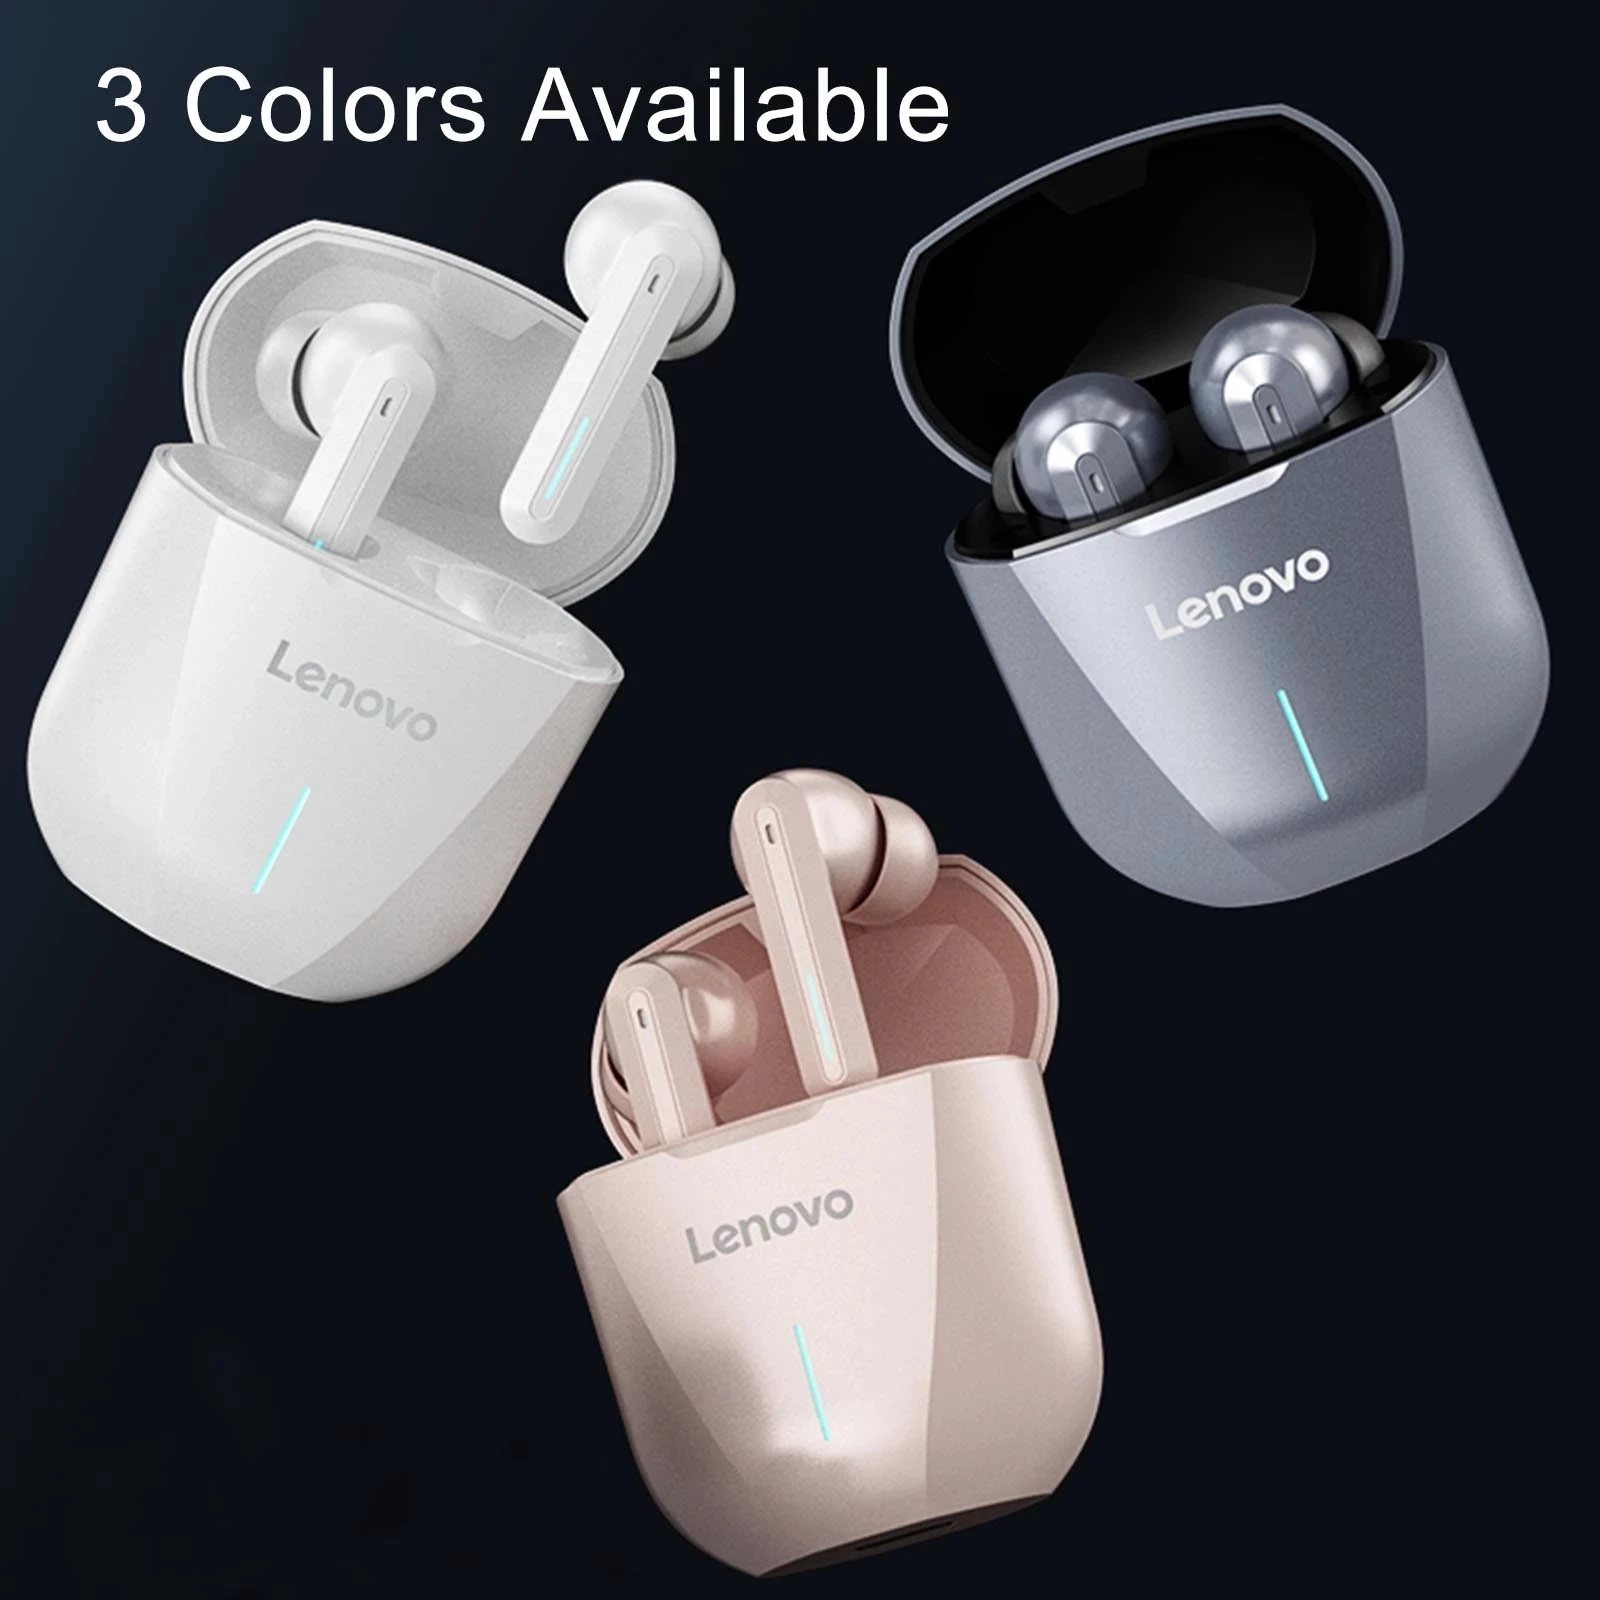 Lenovo XG01 TWS Earphones Wireless Bluetooth 5.0 Headphone Gaming Headsets HiFi Sound Built-in Mic Earbuds with LED Light